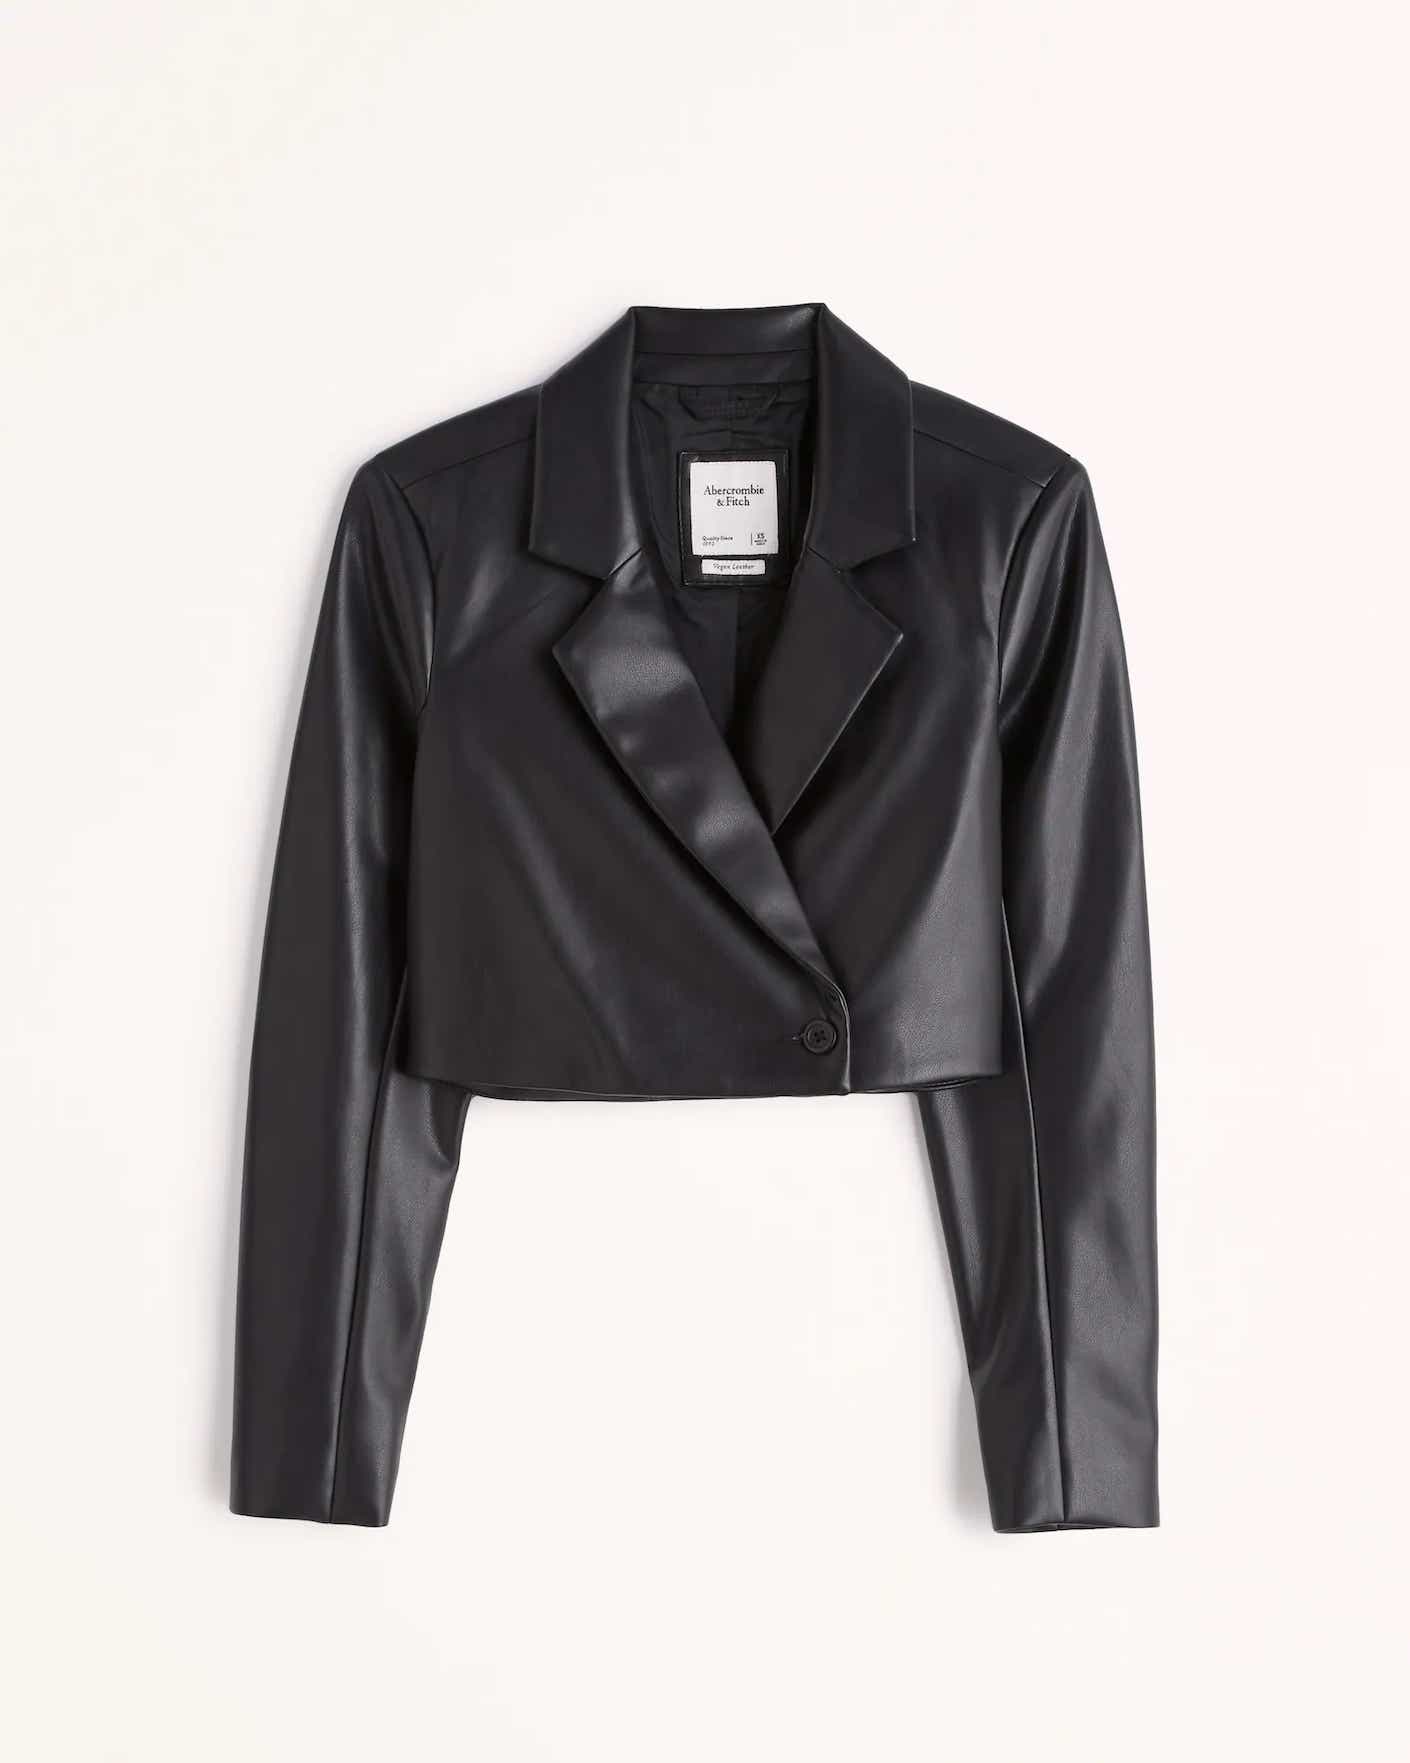 A cropped black leather blazer with a single button at its center lies flat on a white surface.